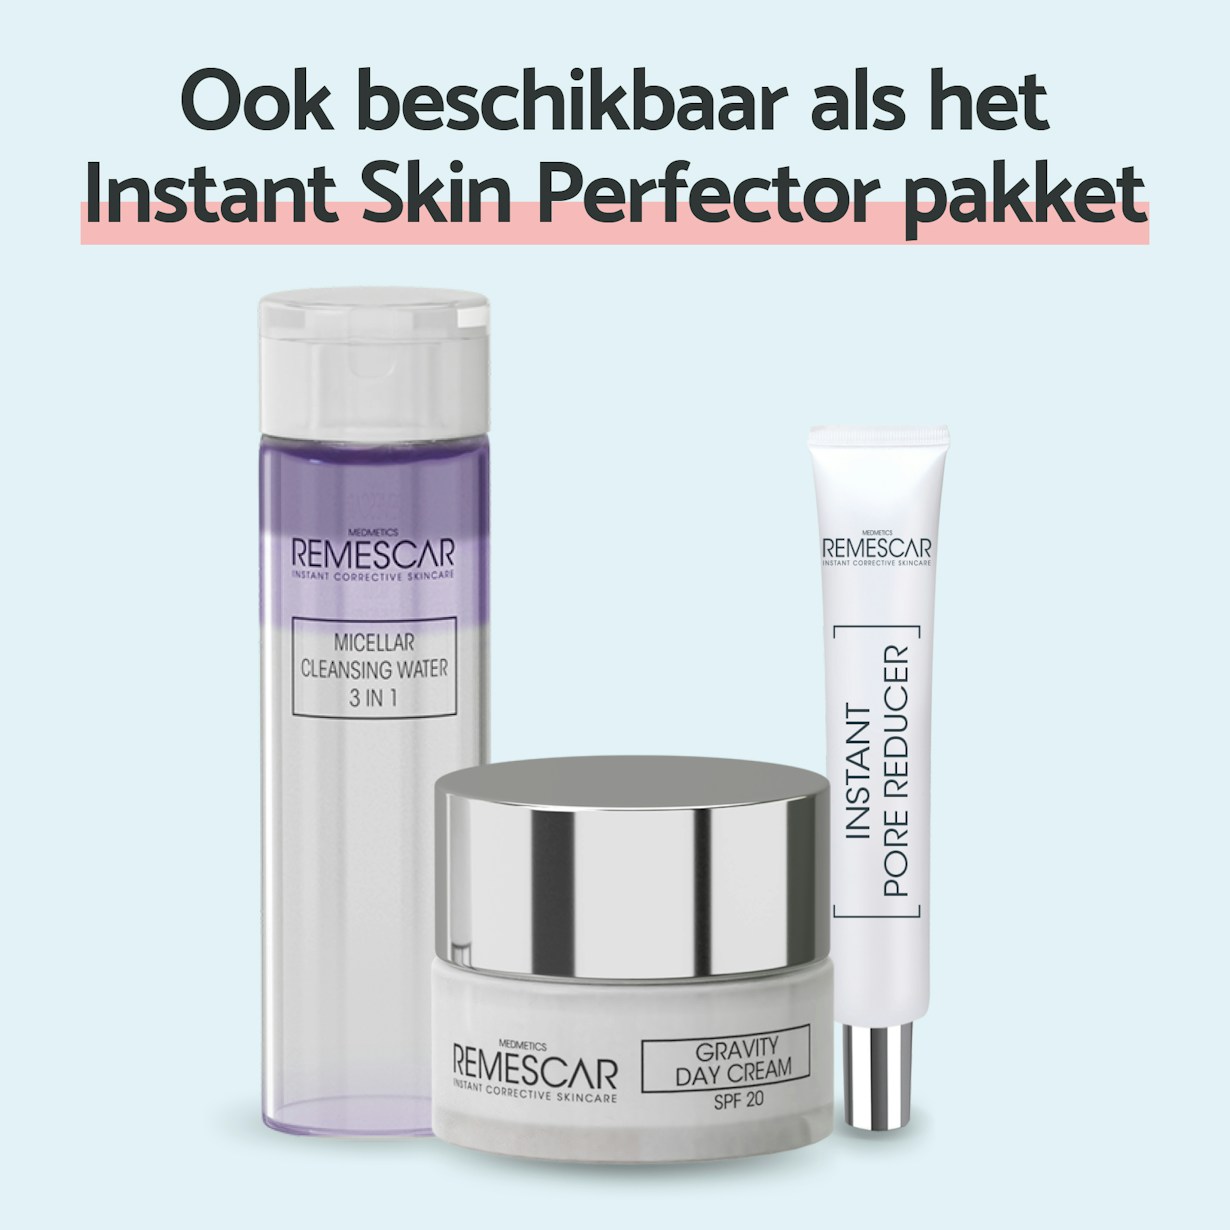 Remescar pdp pictures website and amazon 2000x2000px instant pore reducer 10